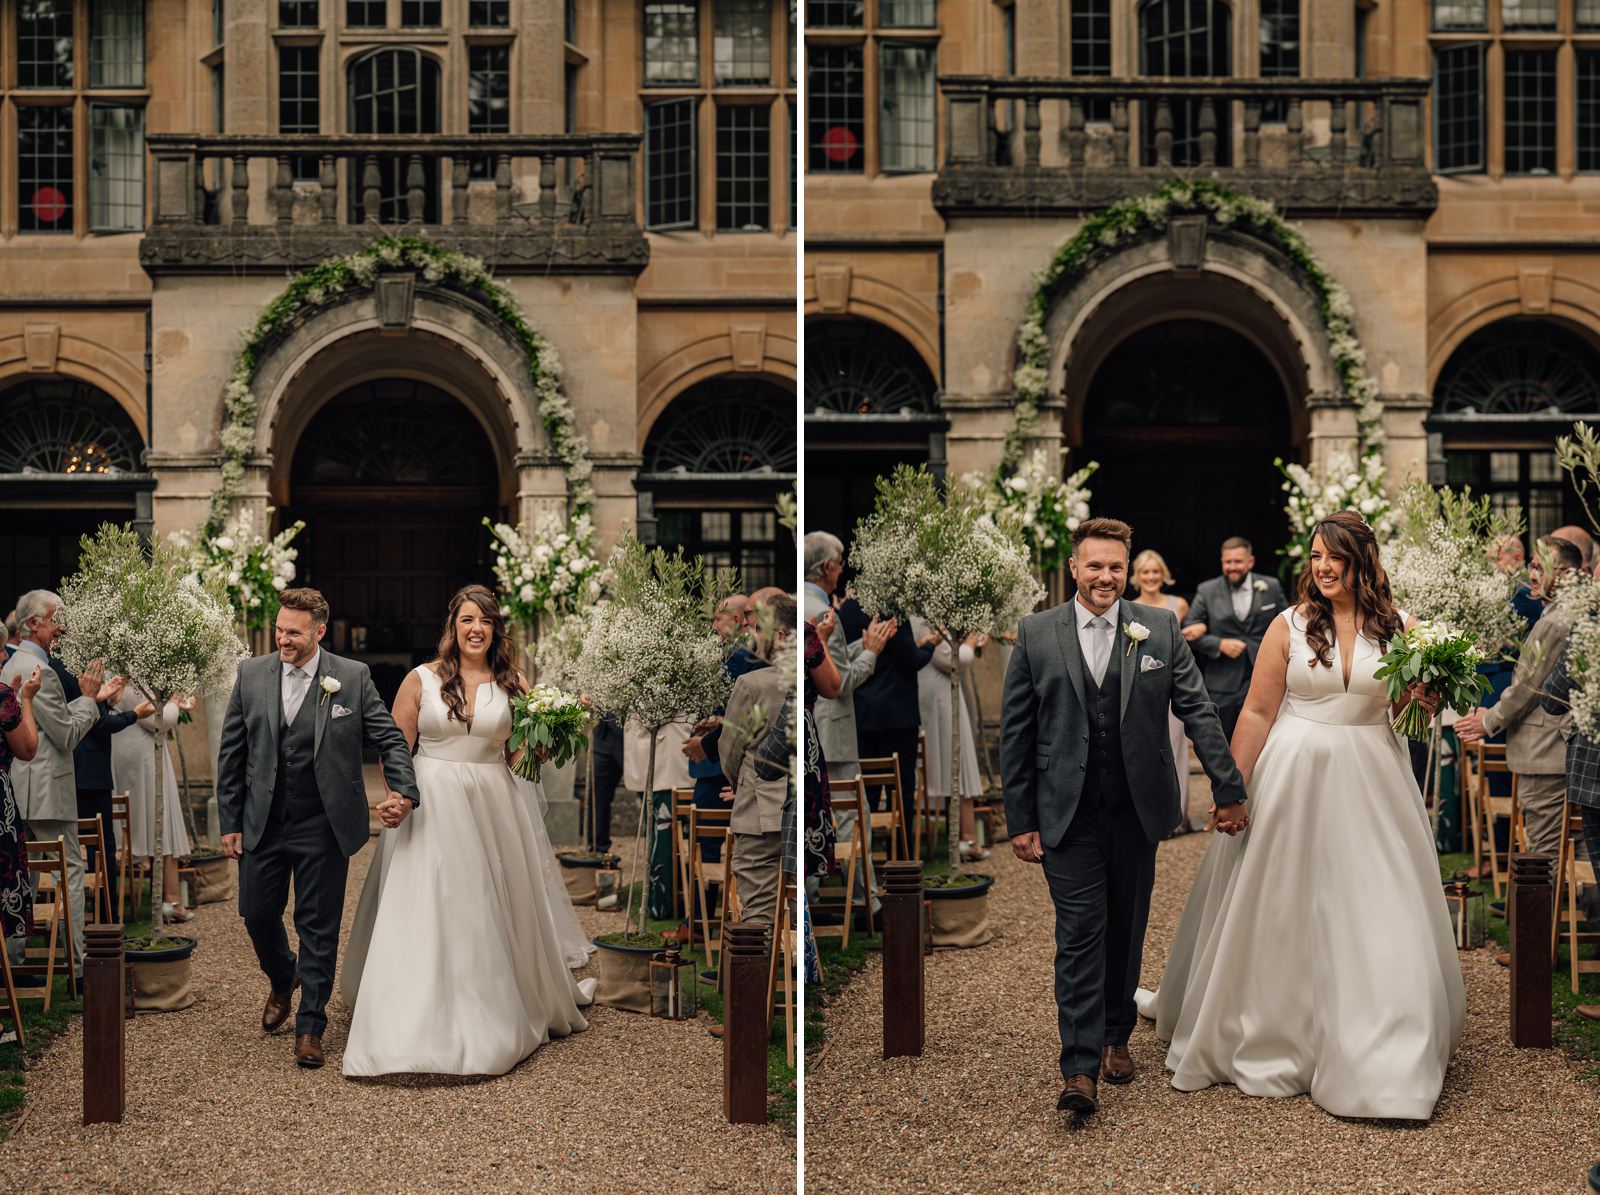 Outdoor marriage ceremony at Coombe Lodge